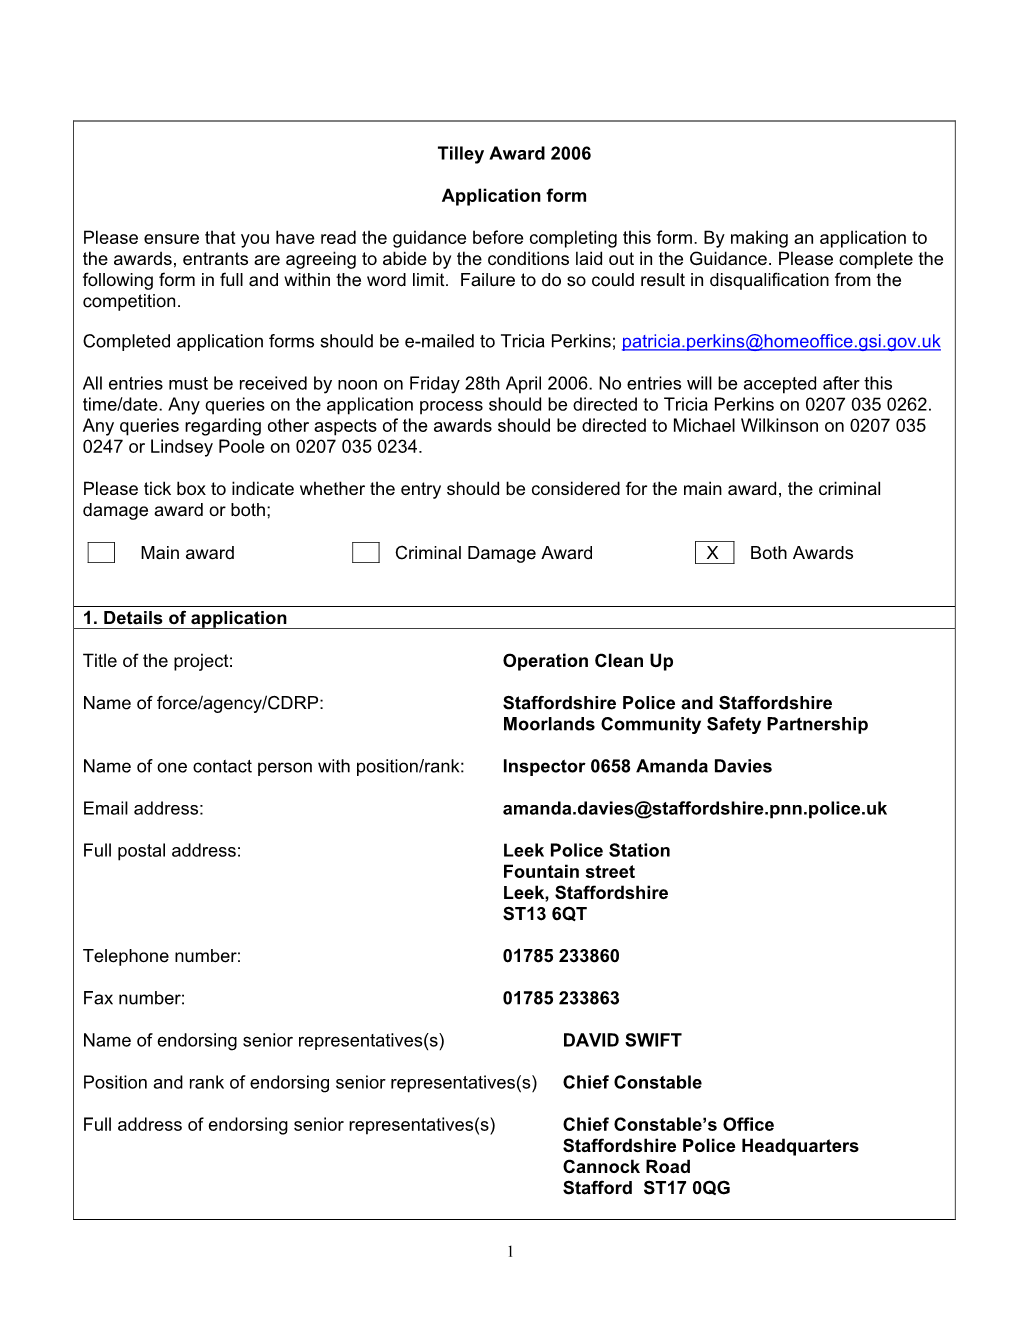 Tilley Award 2006 Application Form Please Ensure That You Have Read